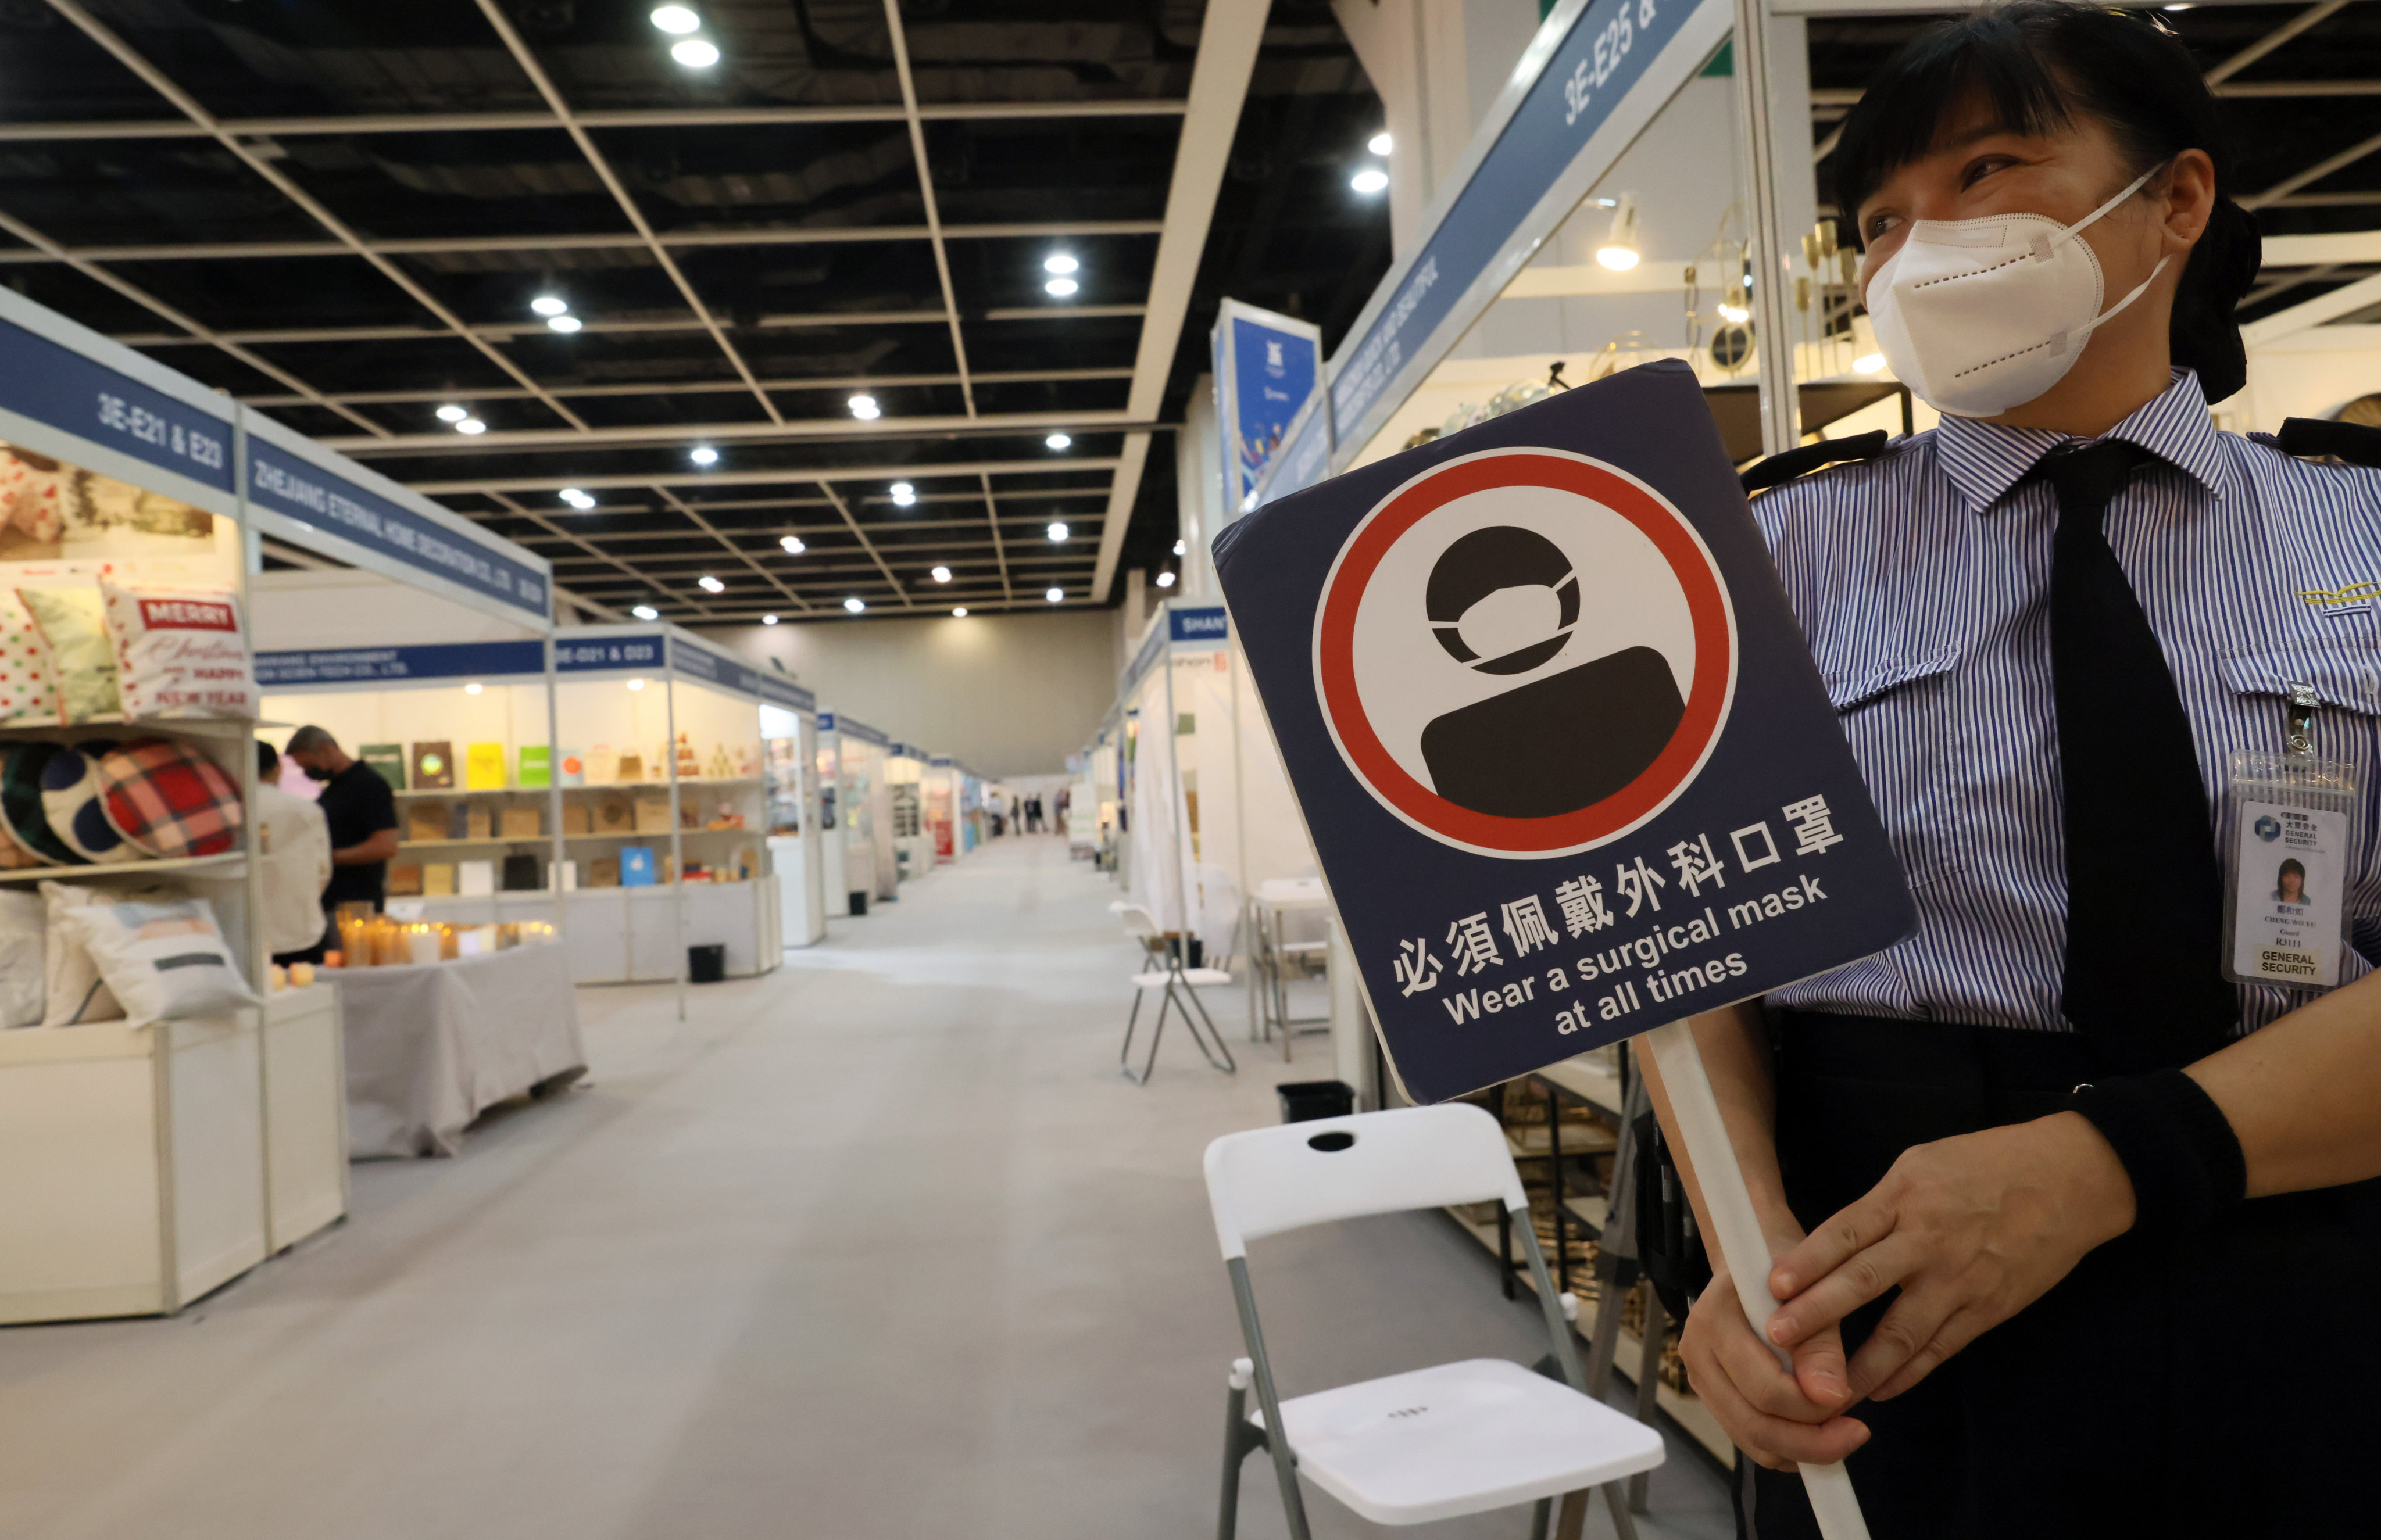 A security staff carries a placard to remind guests to wear a mask at all times at Mega Show at the Hong Kong Convention and Exhibition Centre in Wan Chai on November 15. The four-day international sourcing trade fair features items mainly produced in Asia for international buyers, including houseware, toys and baby products. Photo: Dickson Lee